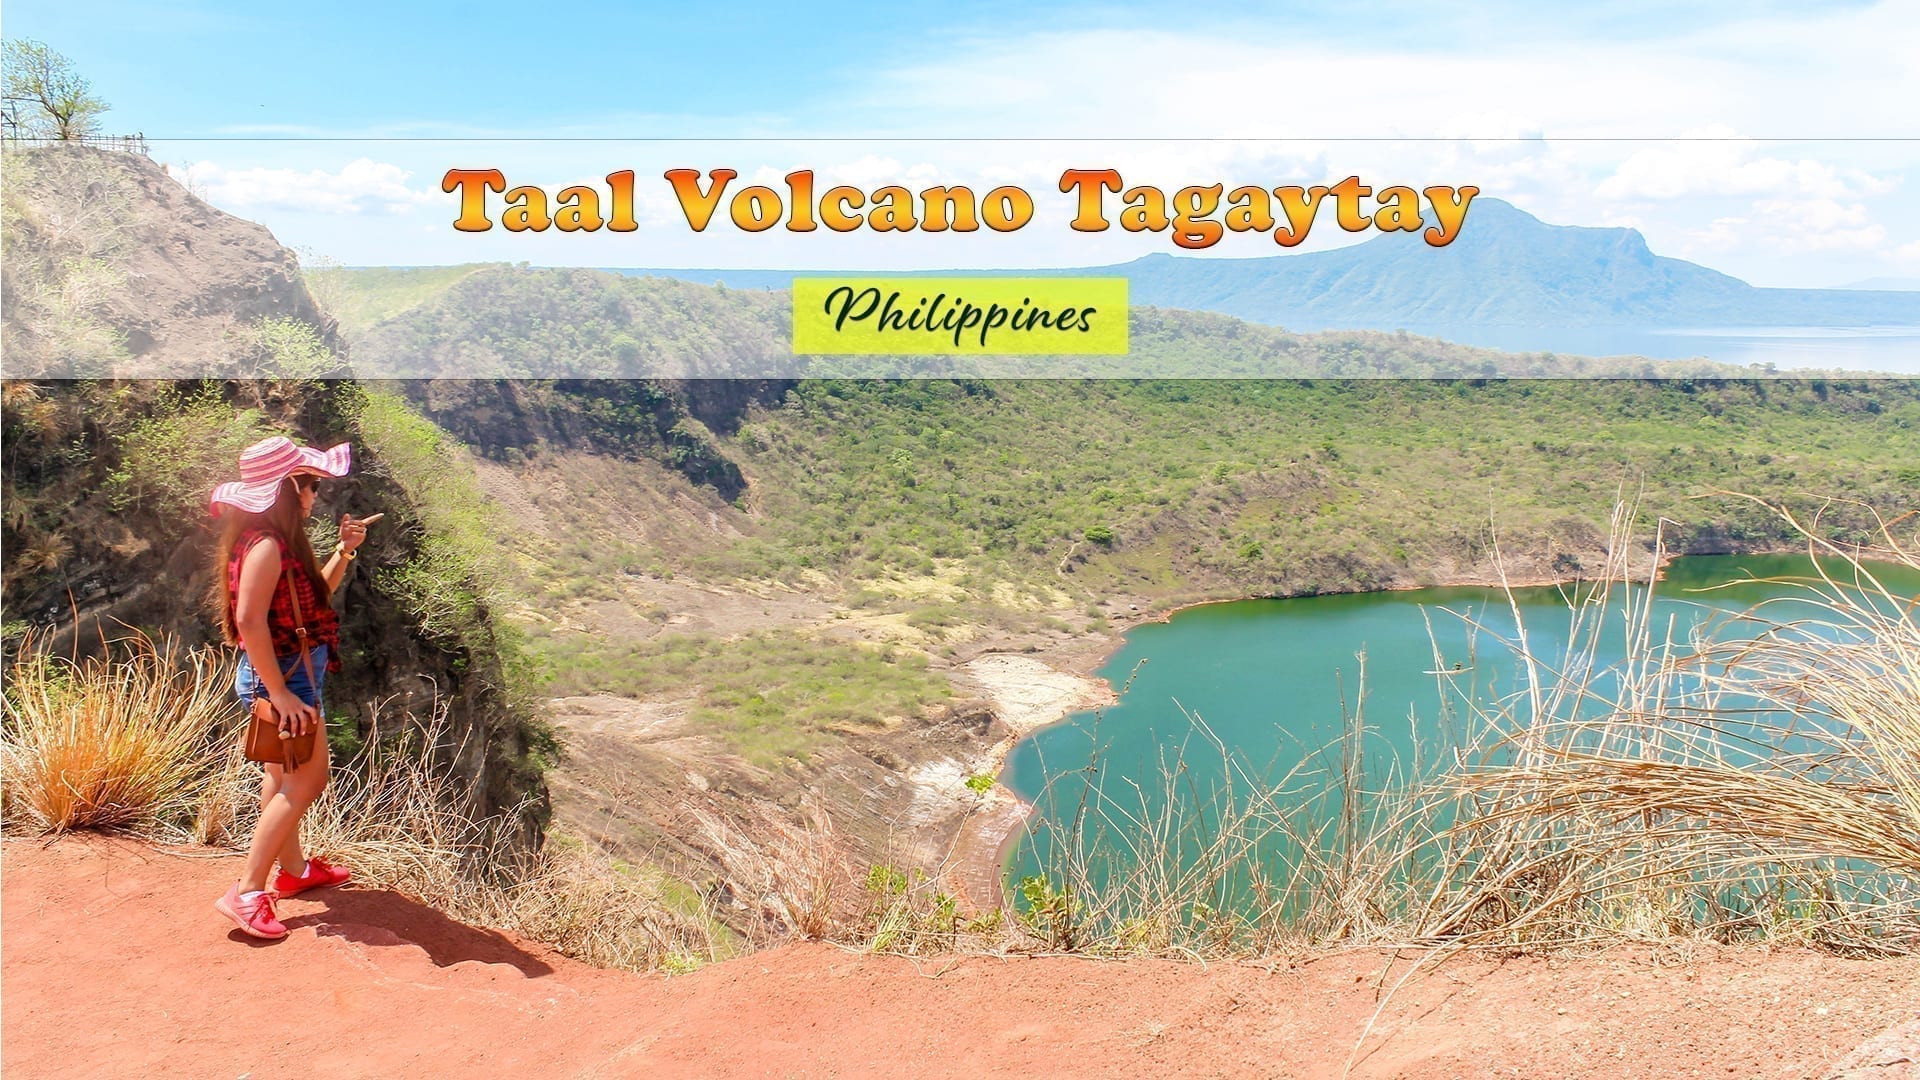 Taal Volcano Tagaytay Cheche looking at the Crater